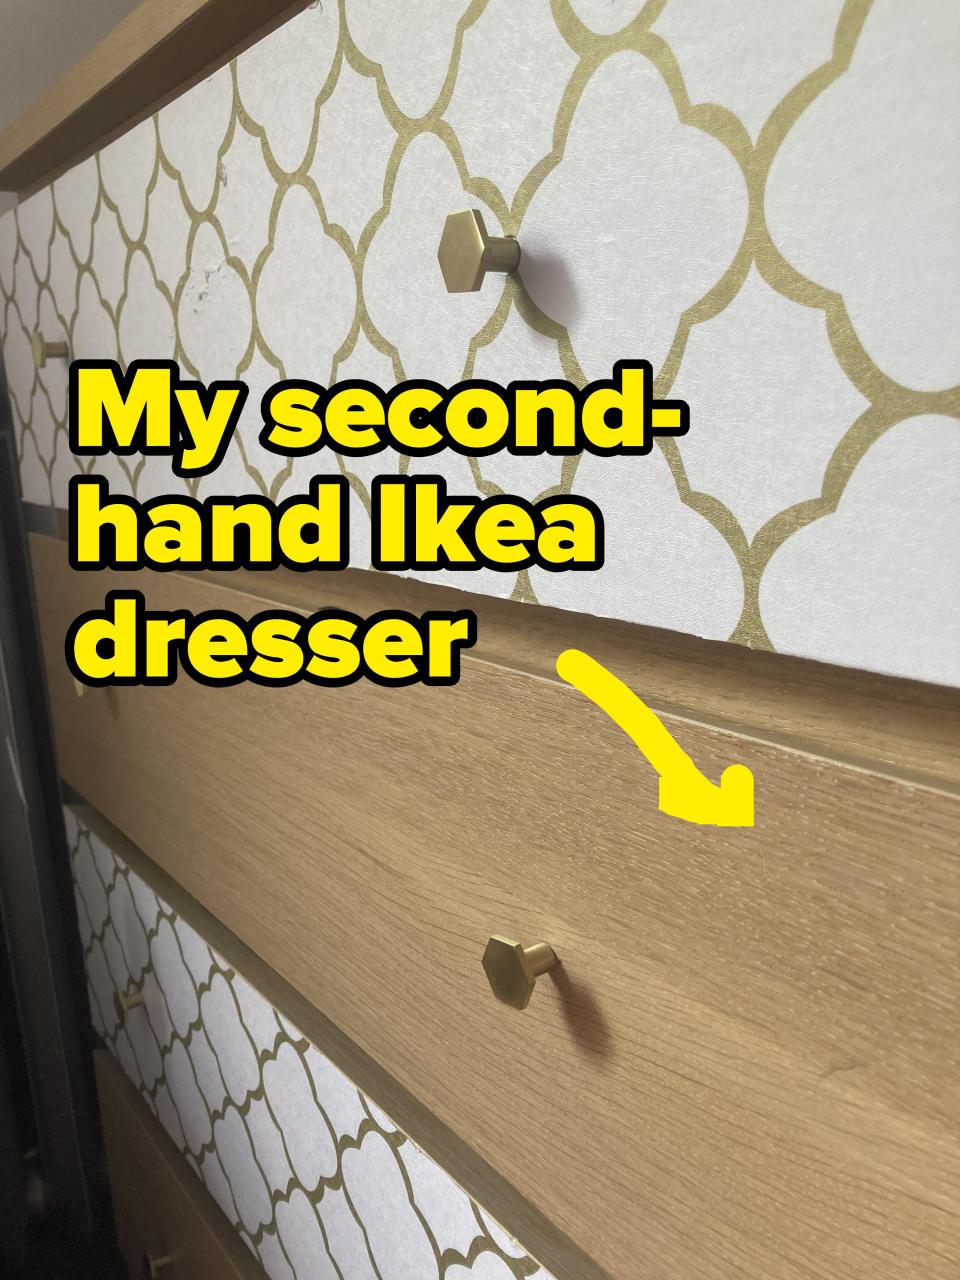 A dresser of drawers from Ikea.